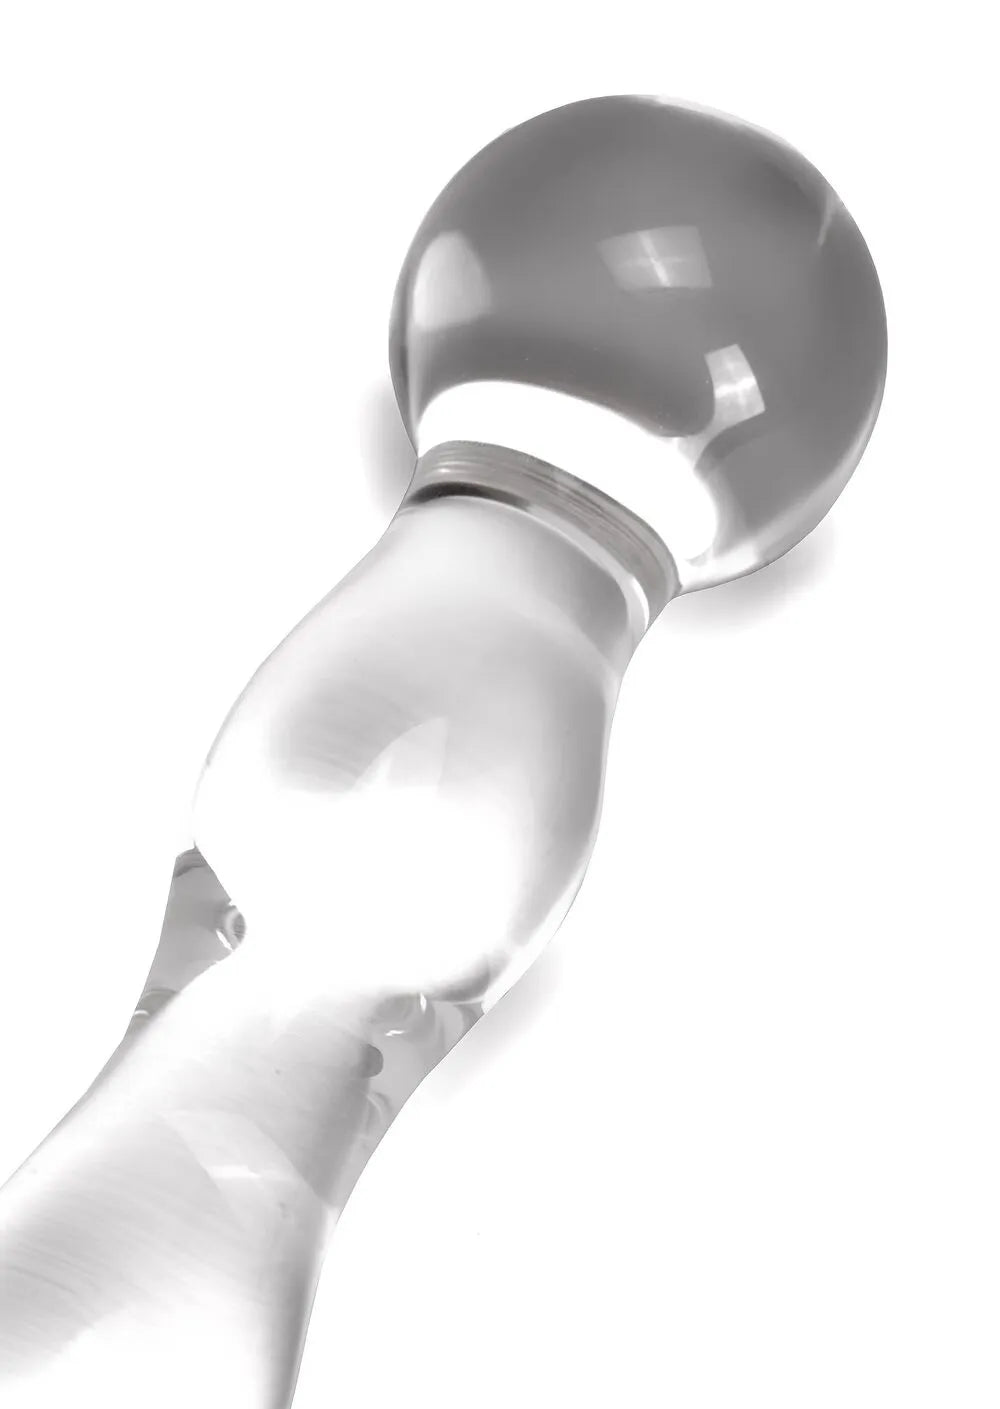 5 Inch Glass Rippled Dildo From Ann Summers, Image 2